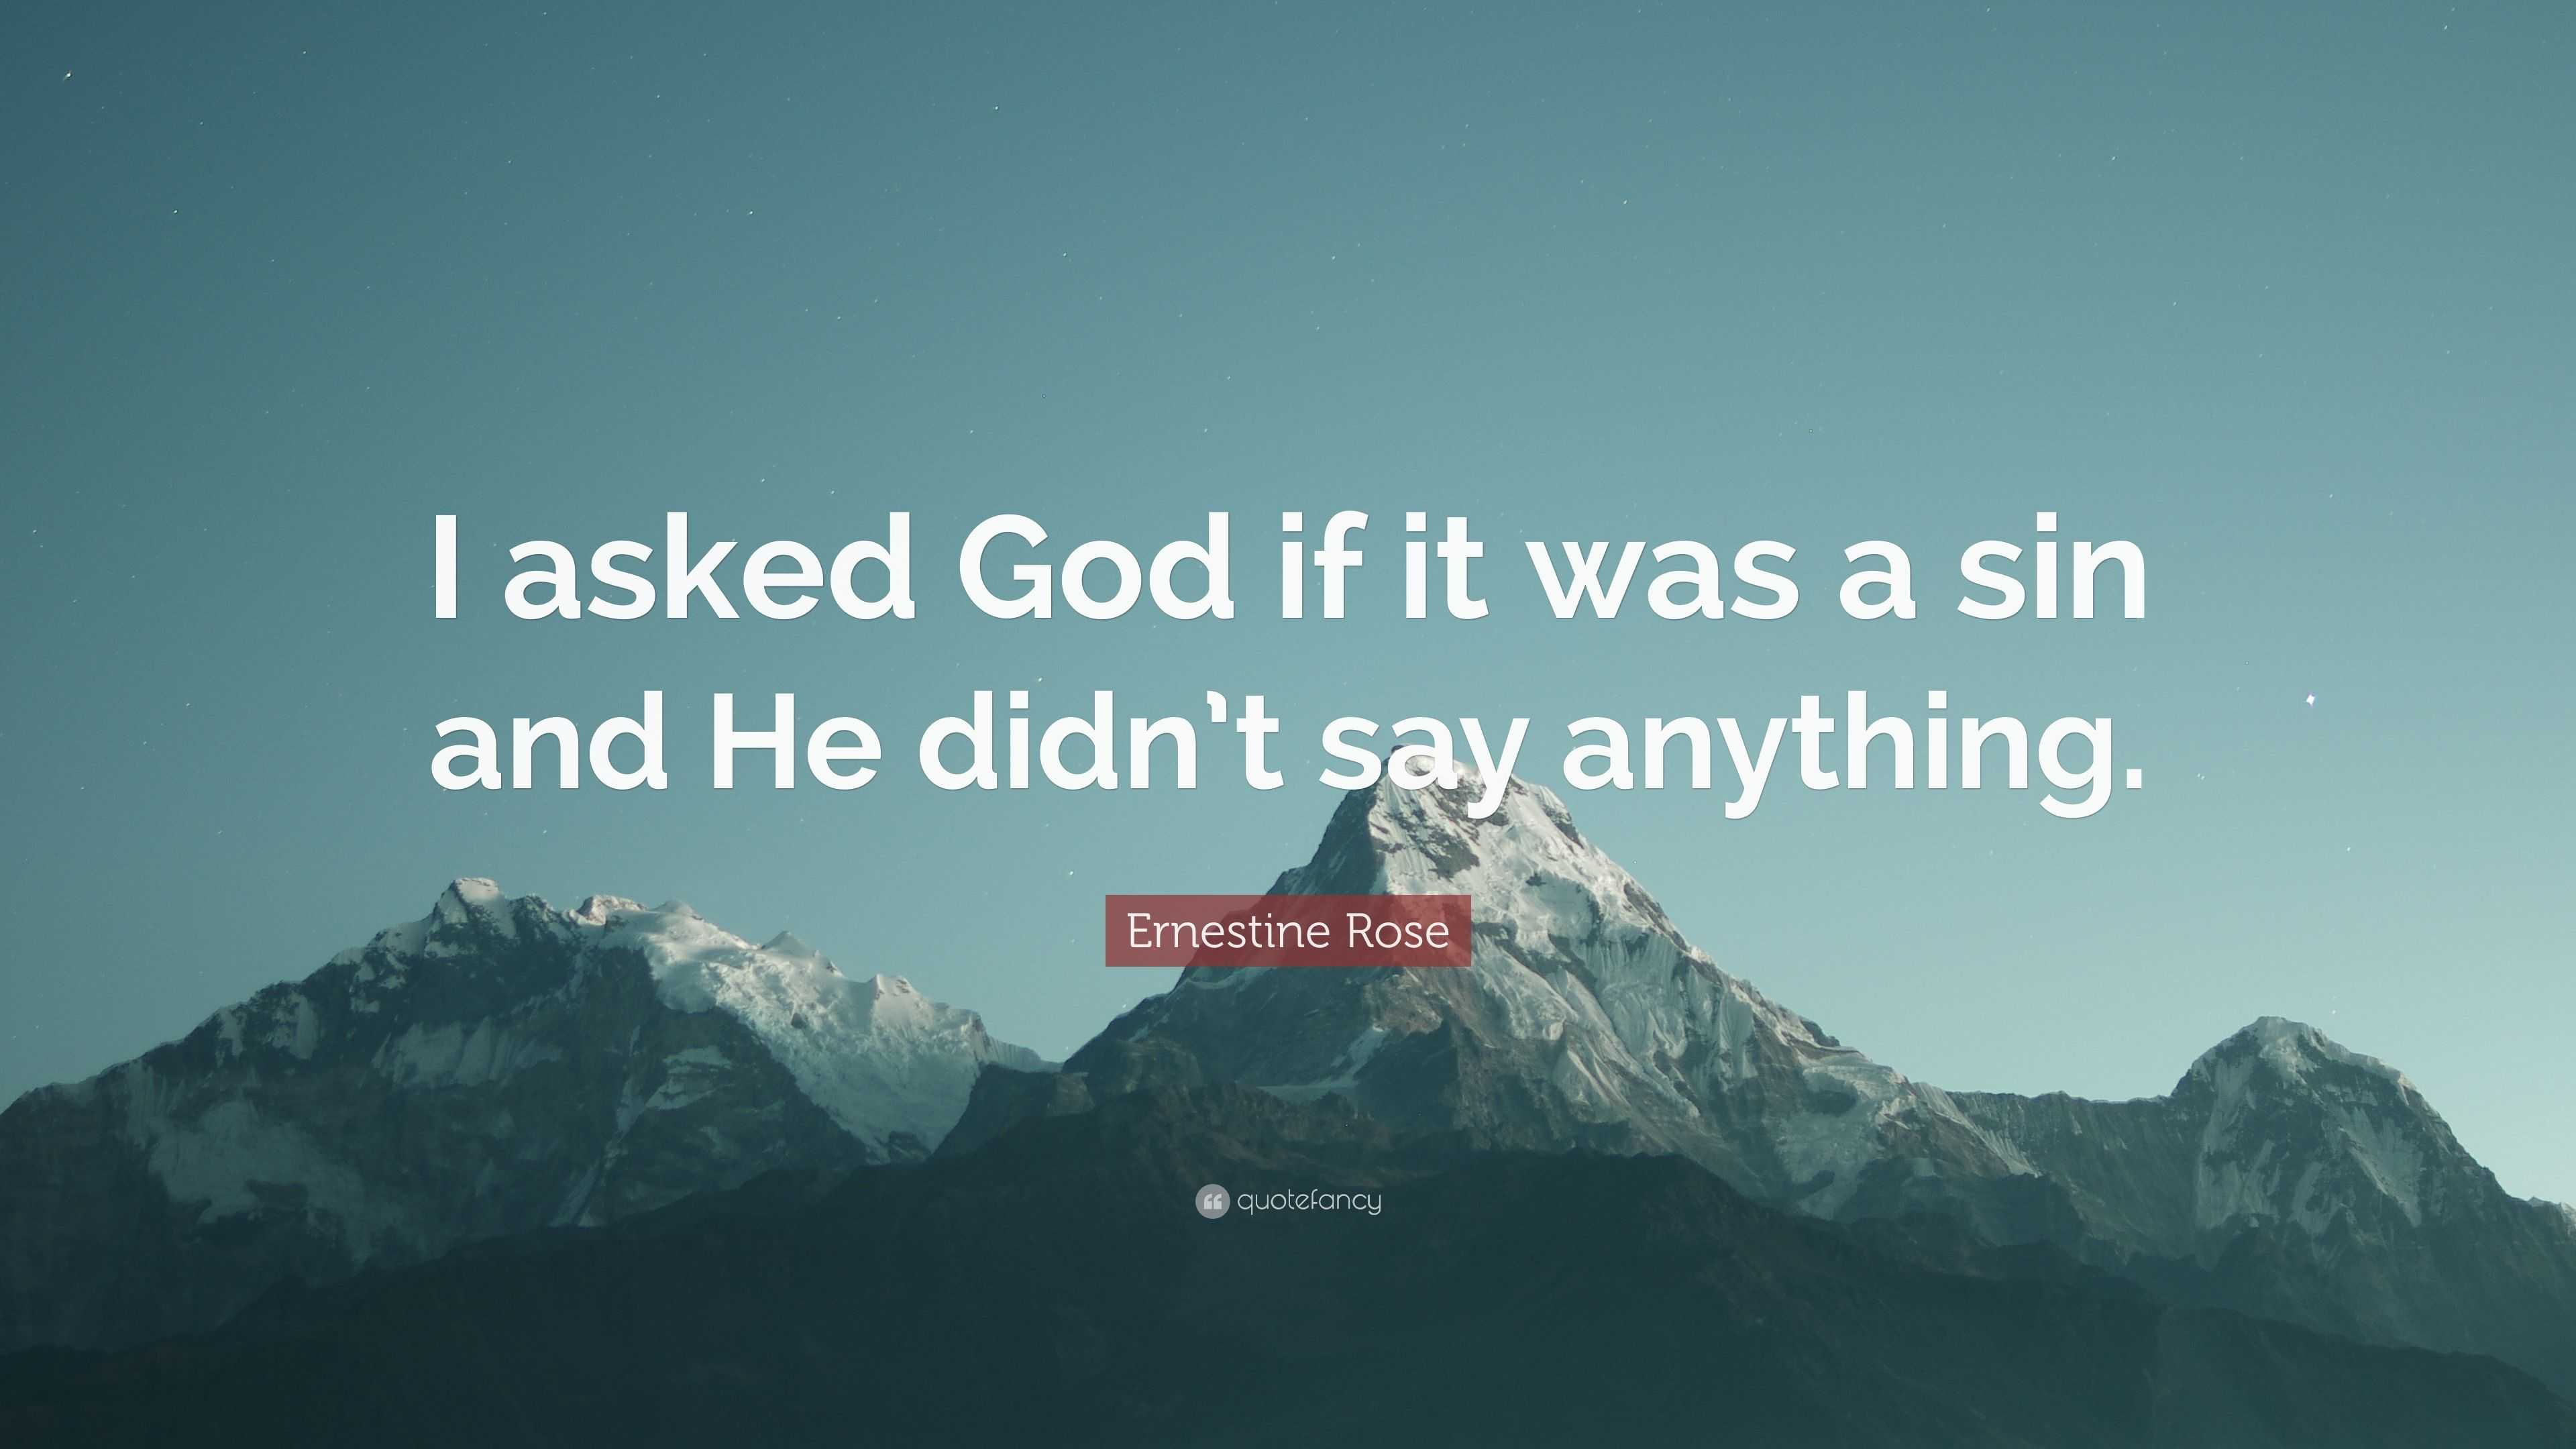 Ernestine Rose Quote: “I asked God if it was a sin and He didn't say